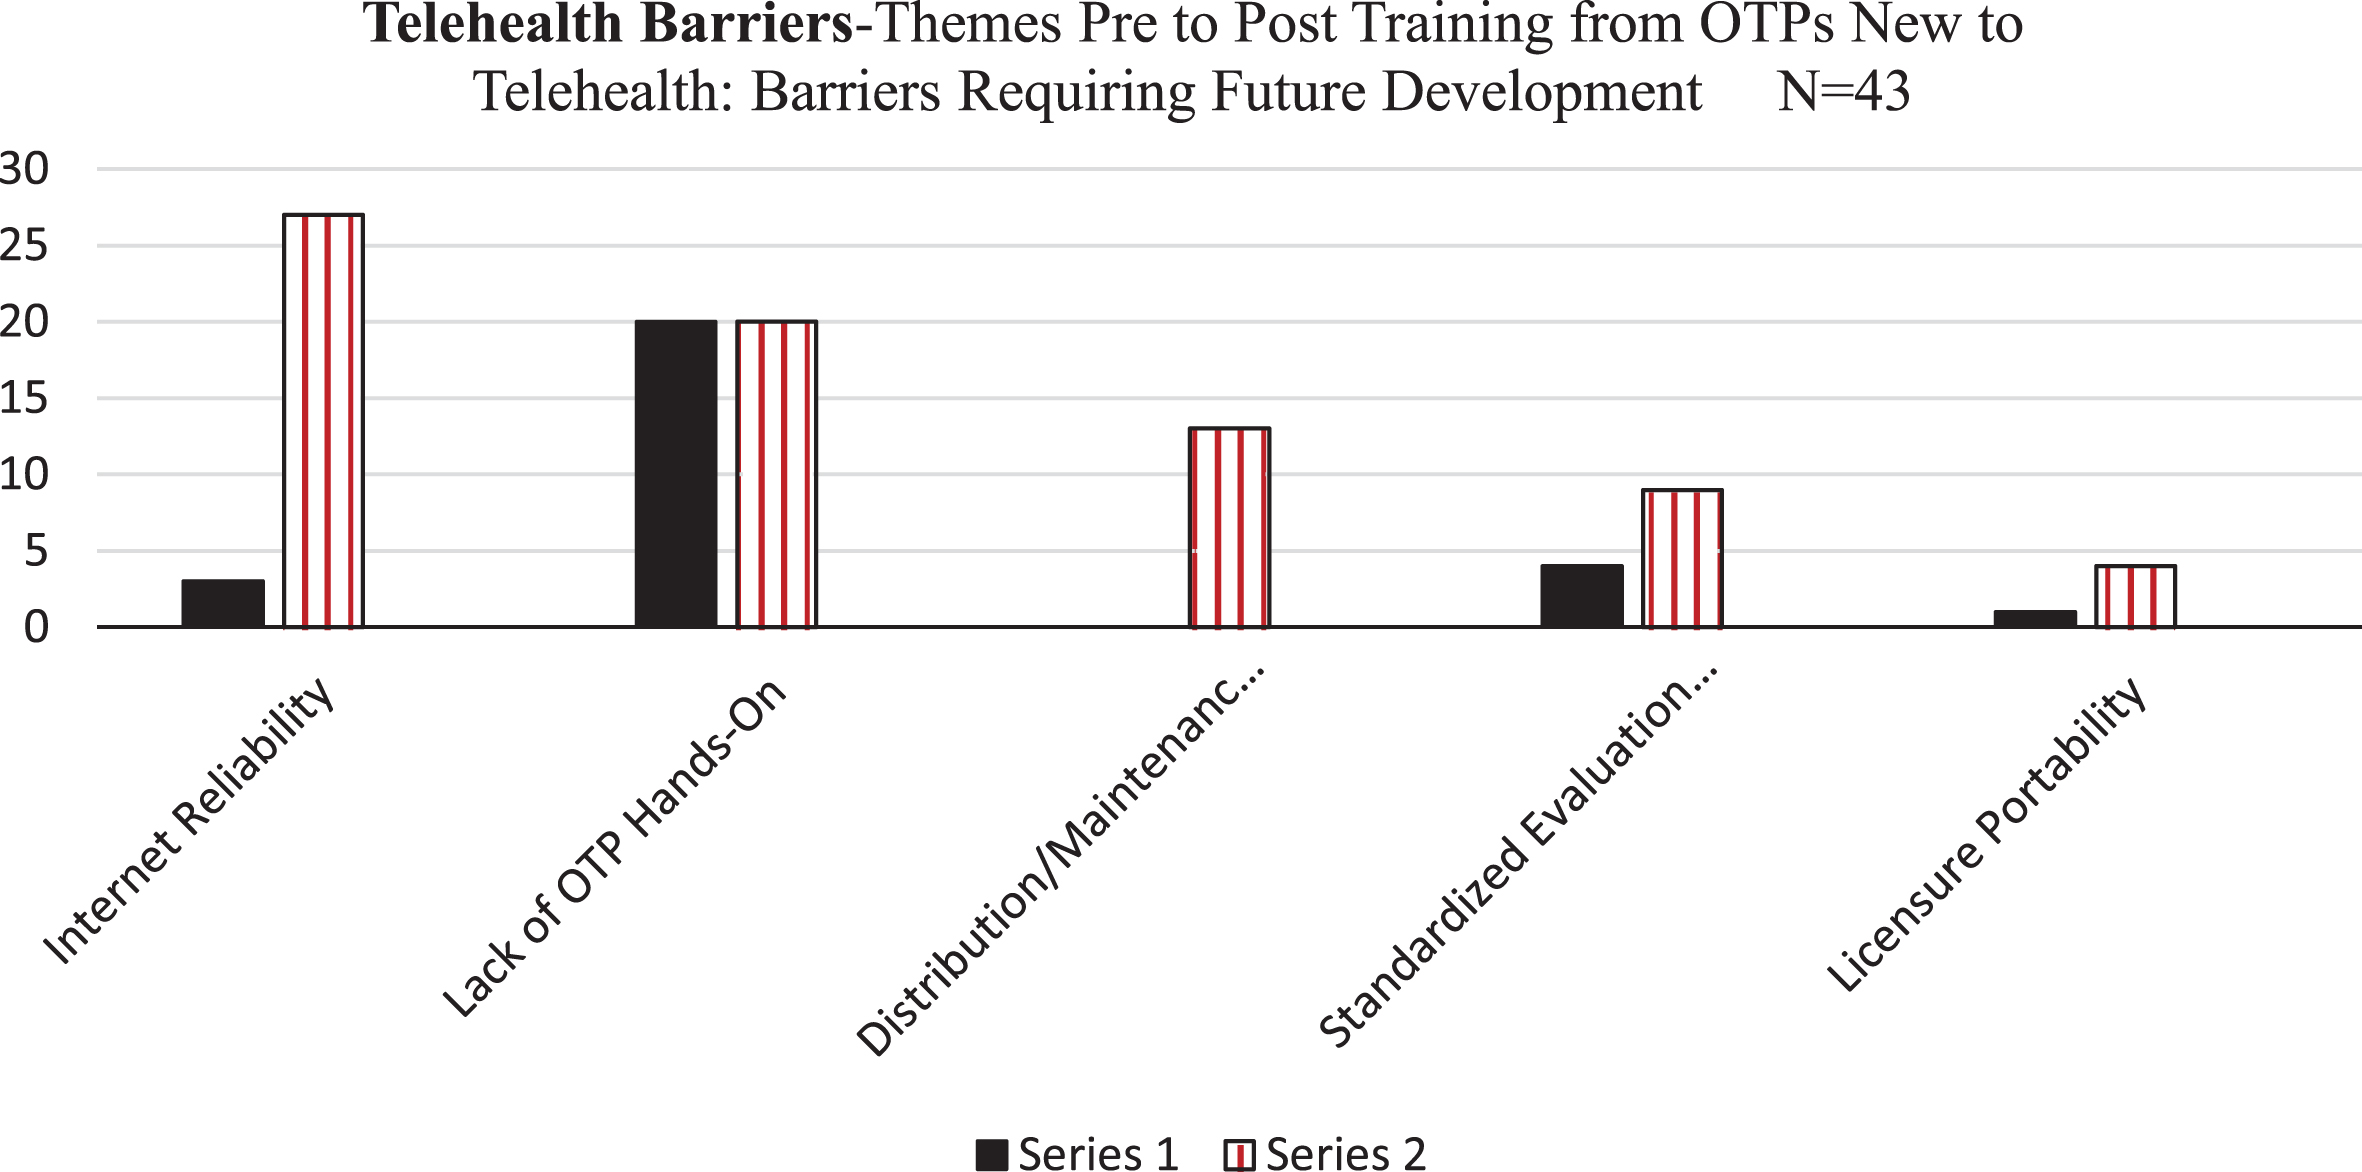 Reported Perceived Barriers with Telehealth per OTPs New to Telehealth: Pre and Post Training Completion: Perceived Barriers Requiring Future Development.